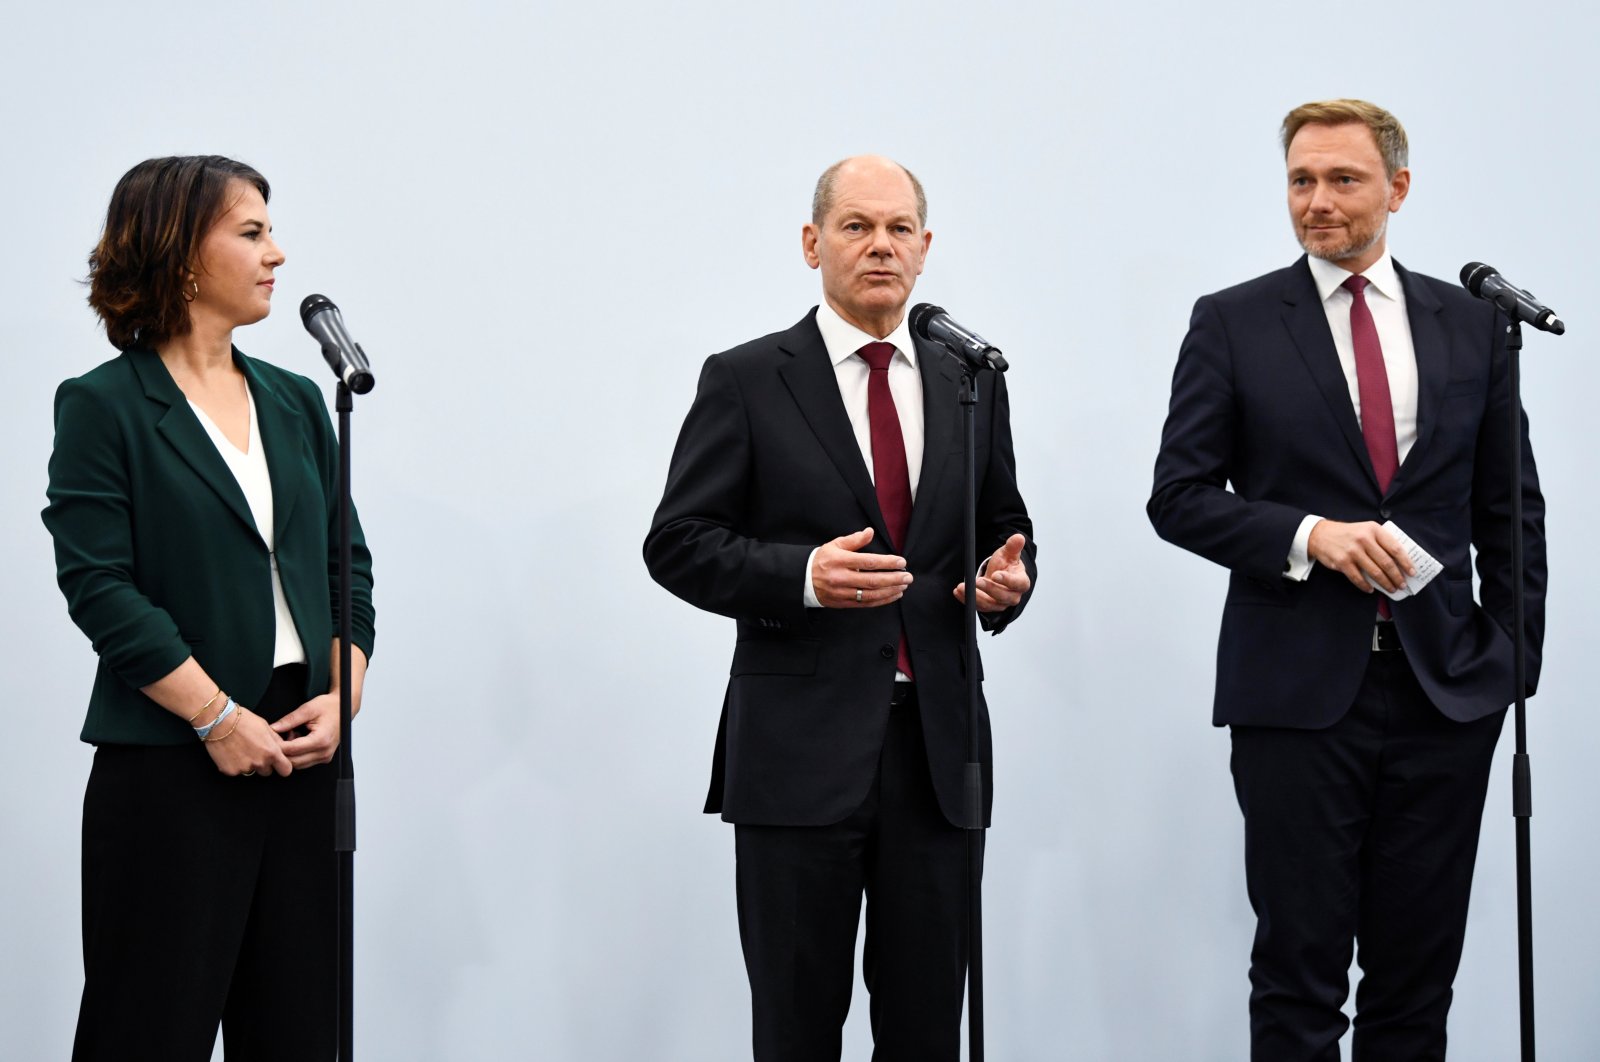 Germany's Greens party co-leader Annalena Baerbock and Free Democratic Party (FDP) leader Christian Lindner listen to Social Democratic Party (SPD) top candidate for chancellor Olaf Scholz as he gives a statement following a meeting for exploratory talks for a possible new government coalition in Berlin, Germany, Oct. 15, 2021. (Reuters Photo)